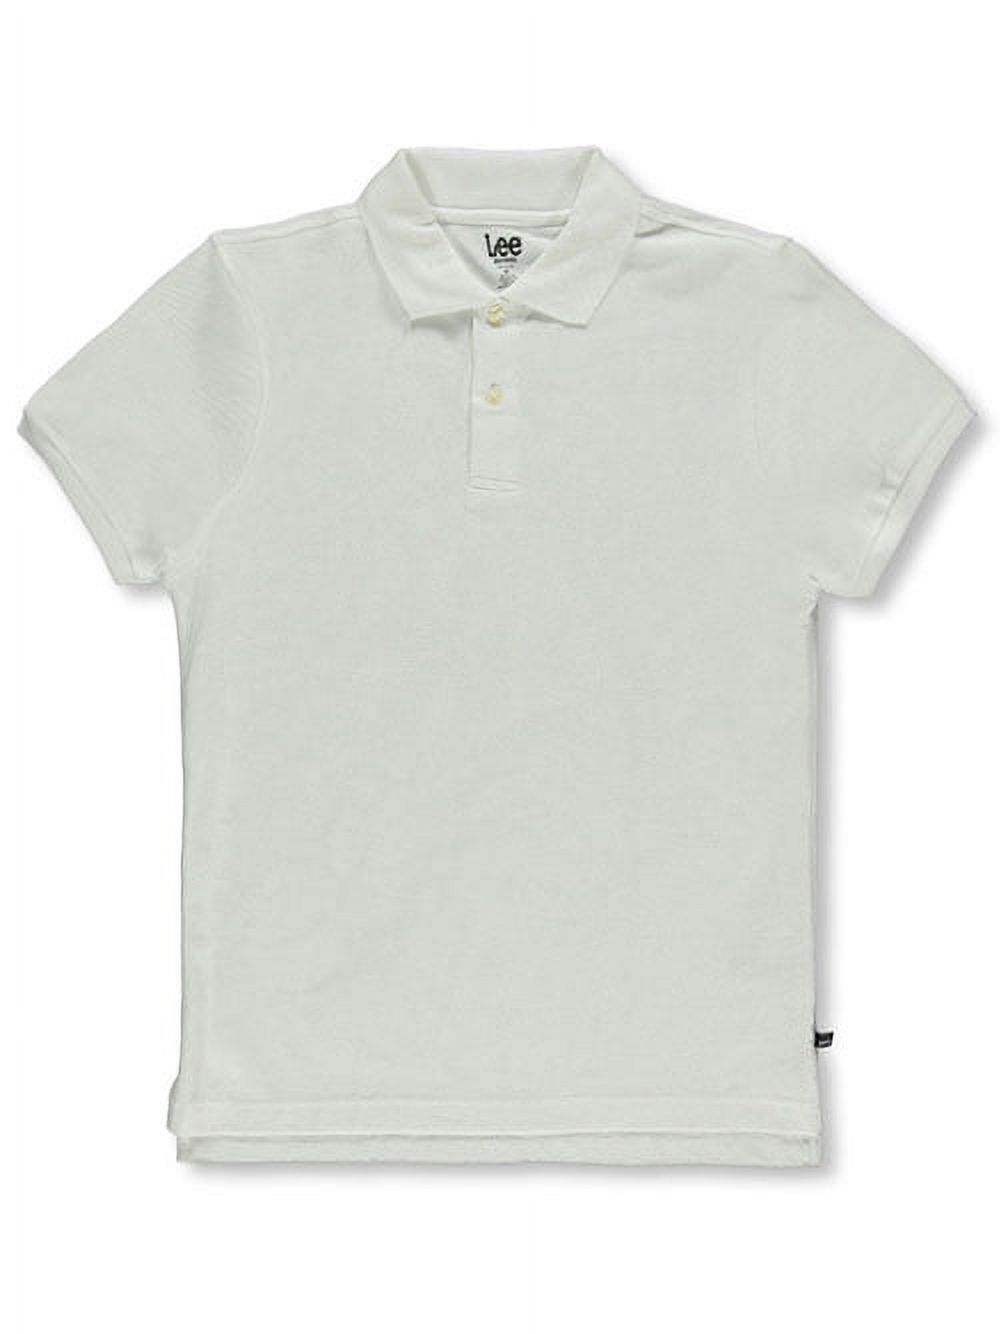 Lee Uniforms Young Mens Short Sleeve Polo - image 2 of 2